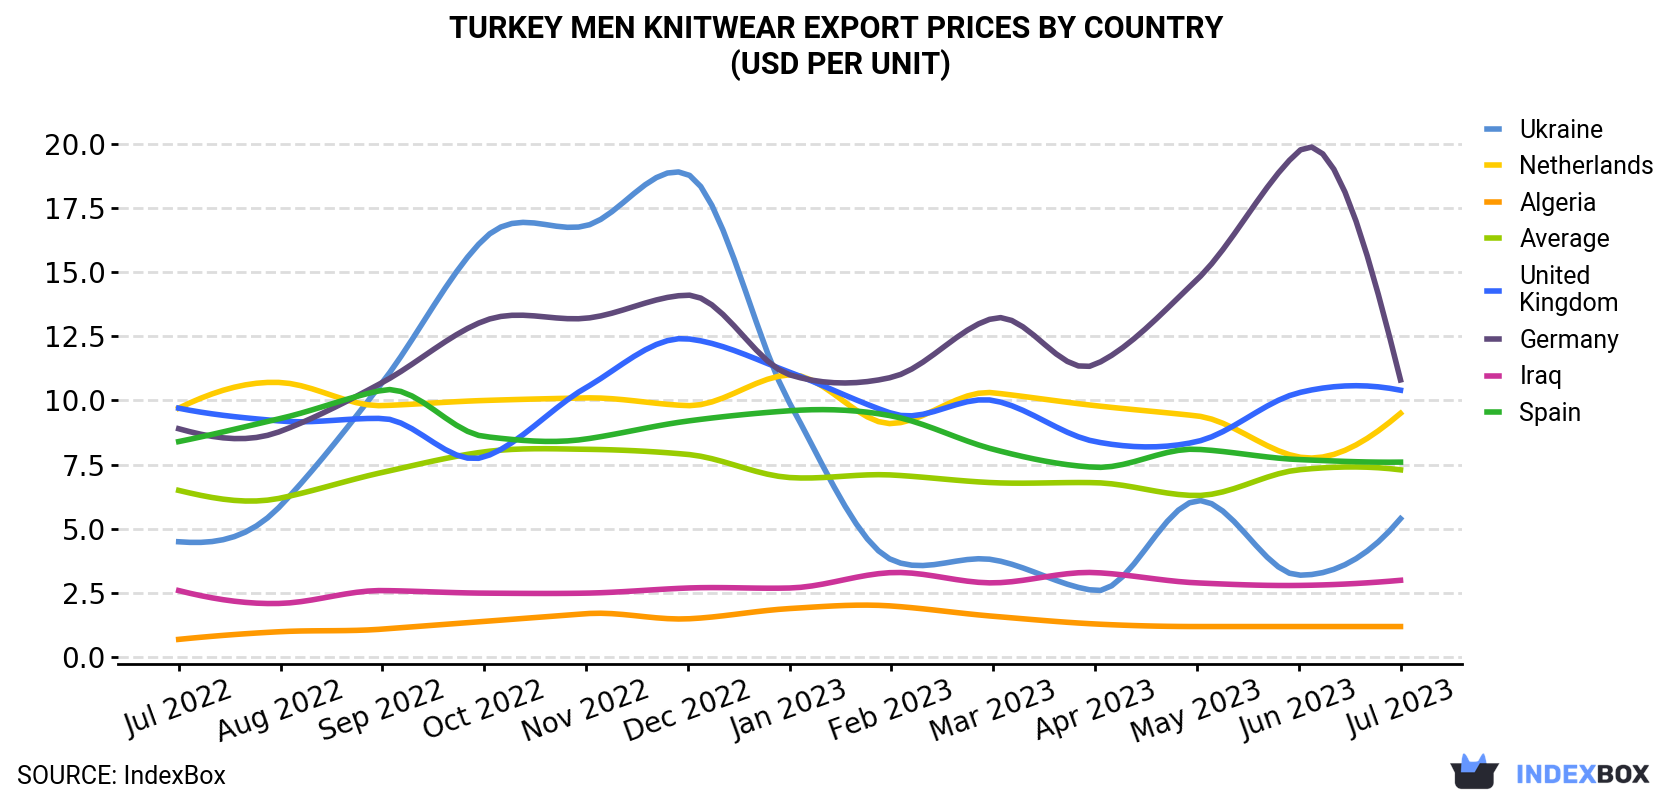 Turkey Men Knitwear Export Prices By Country (USD Per Unit)